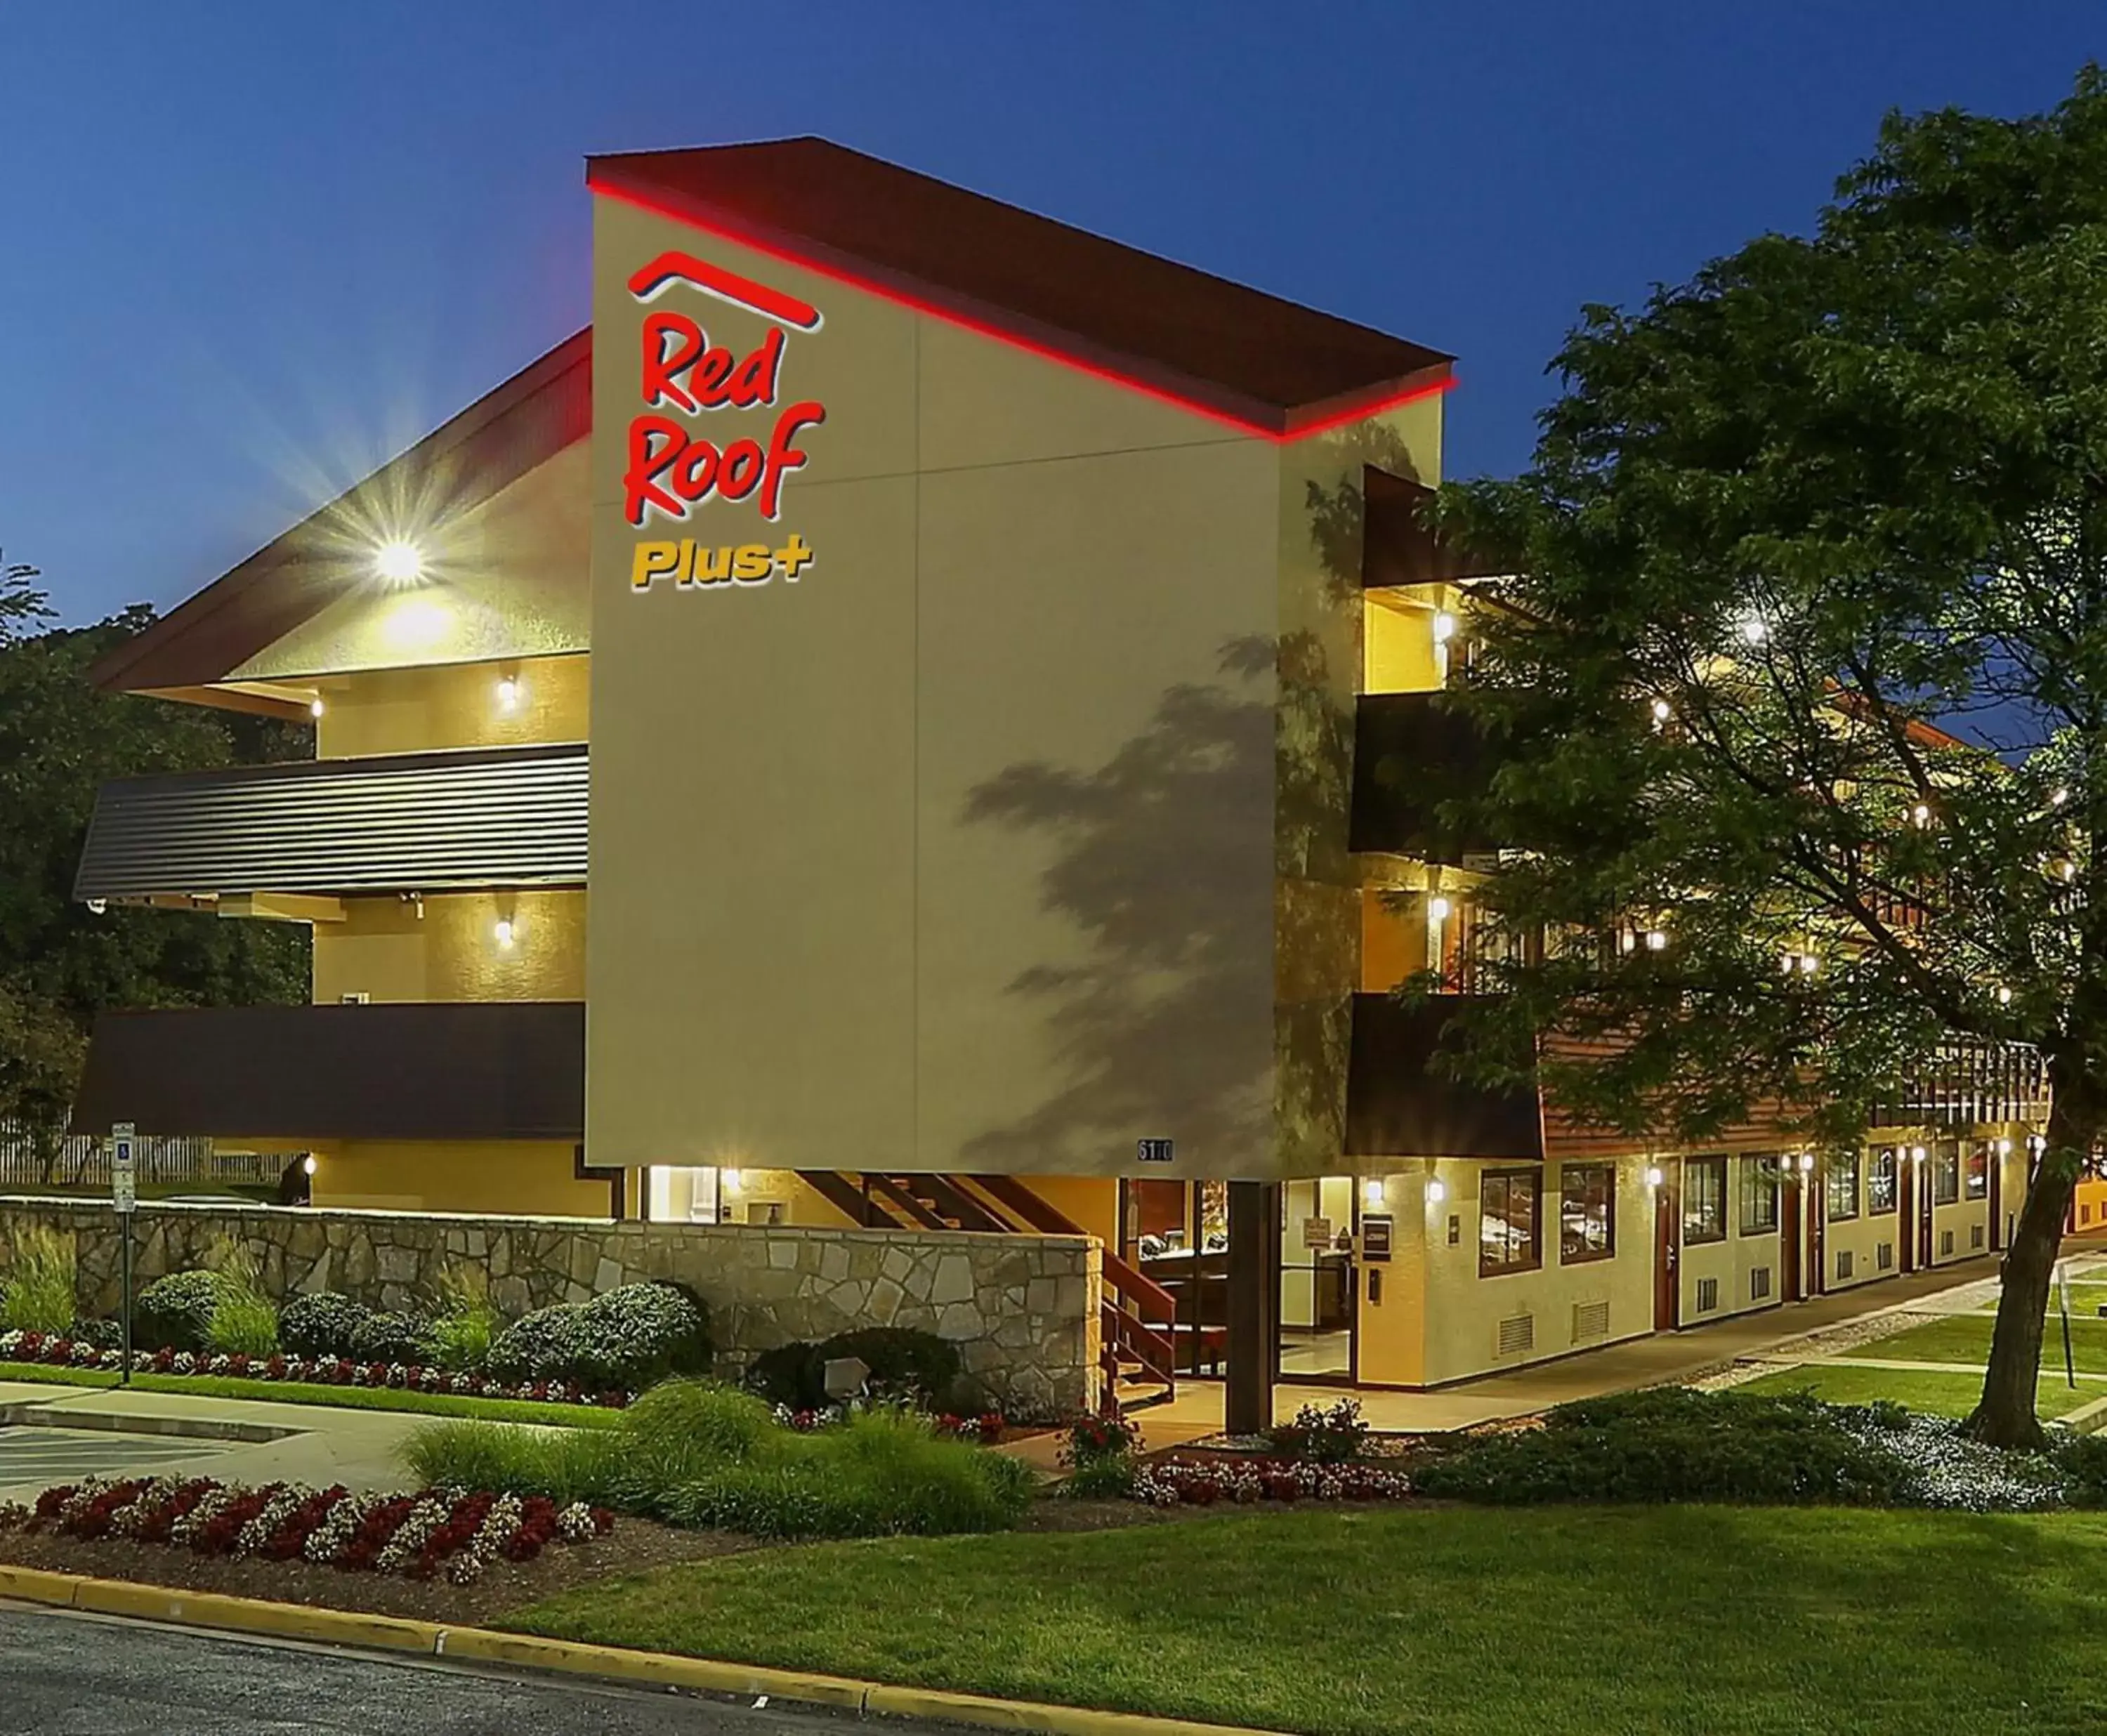 Property Building in Red Roof Inn PLUS+ Washington DC - Oxon Hill